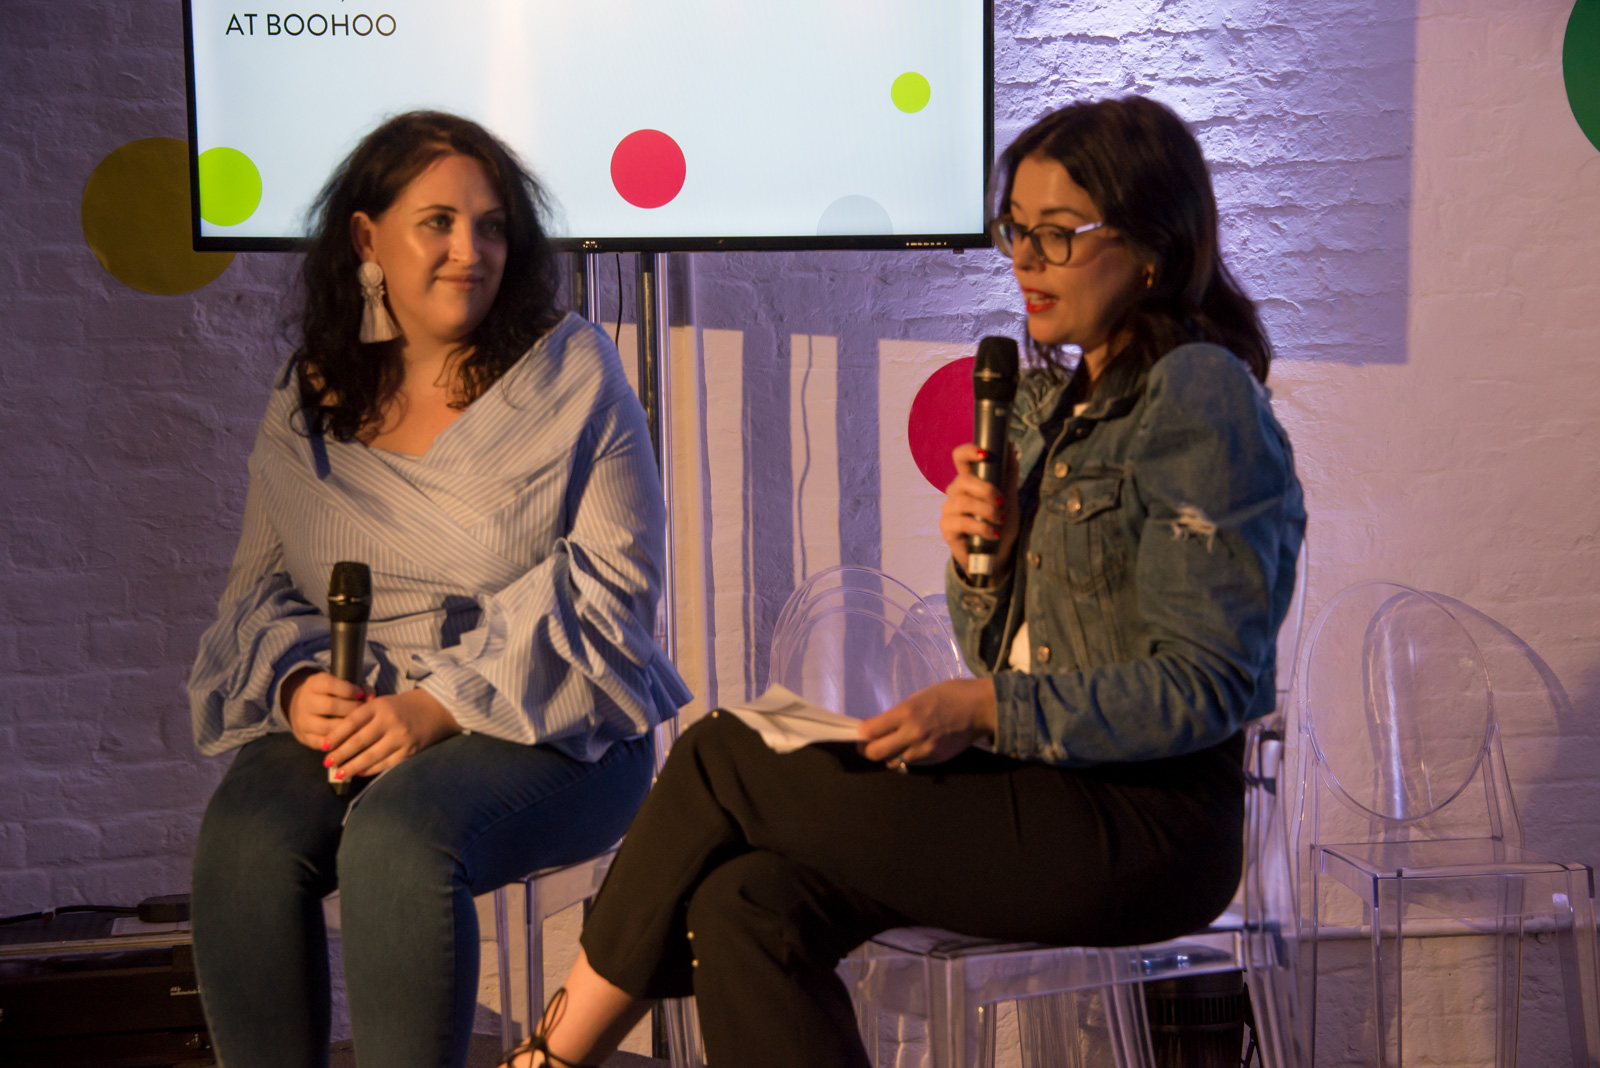 gfw live boohoo janine smith head of buying interviewed by sophie rycroft image by tina mayr-4.jpg